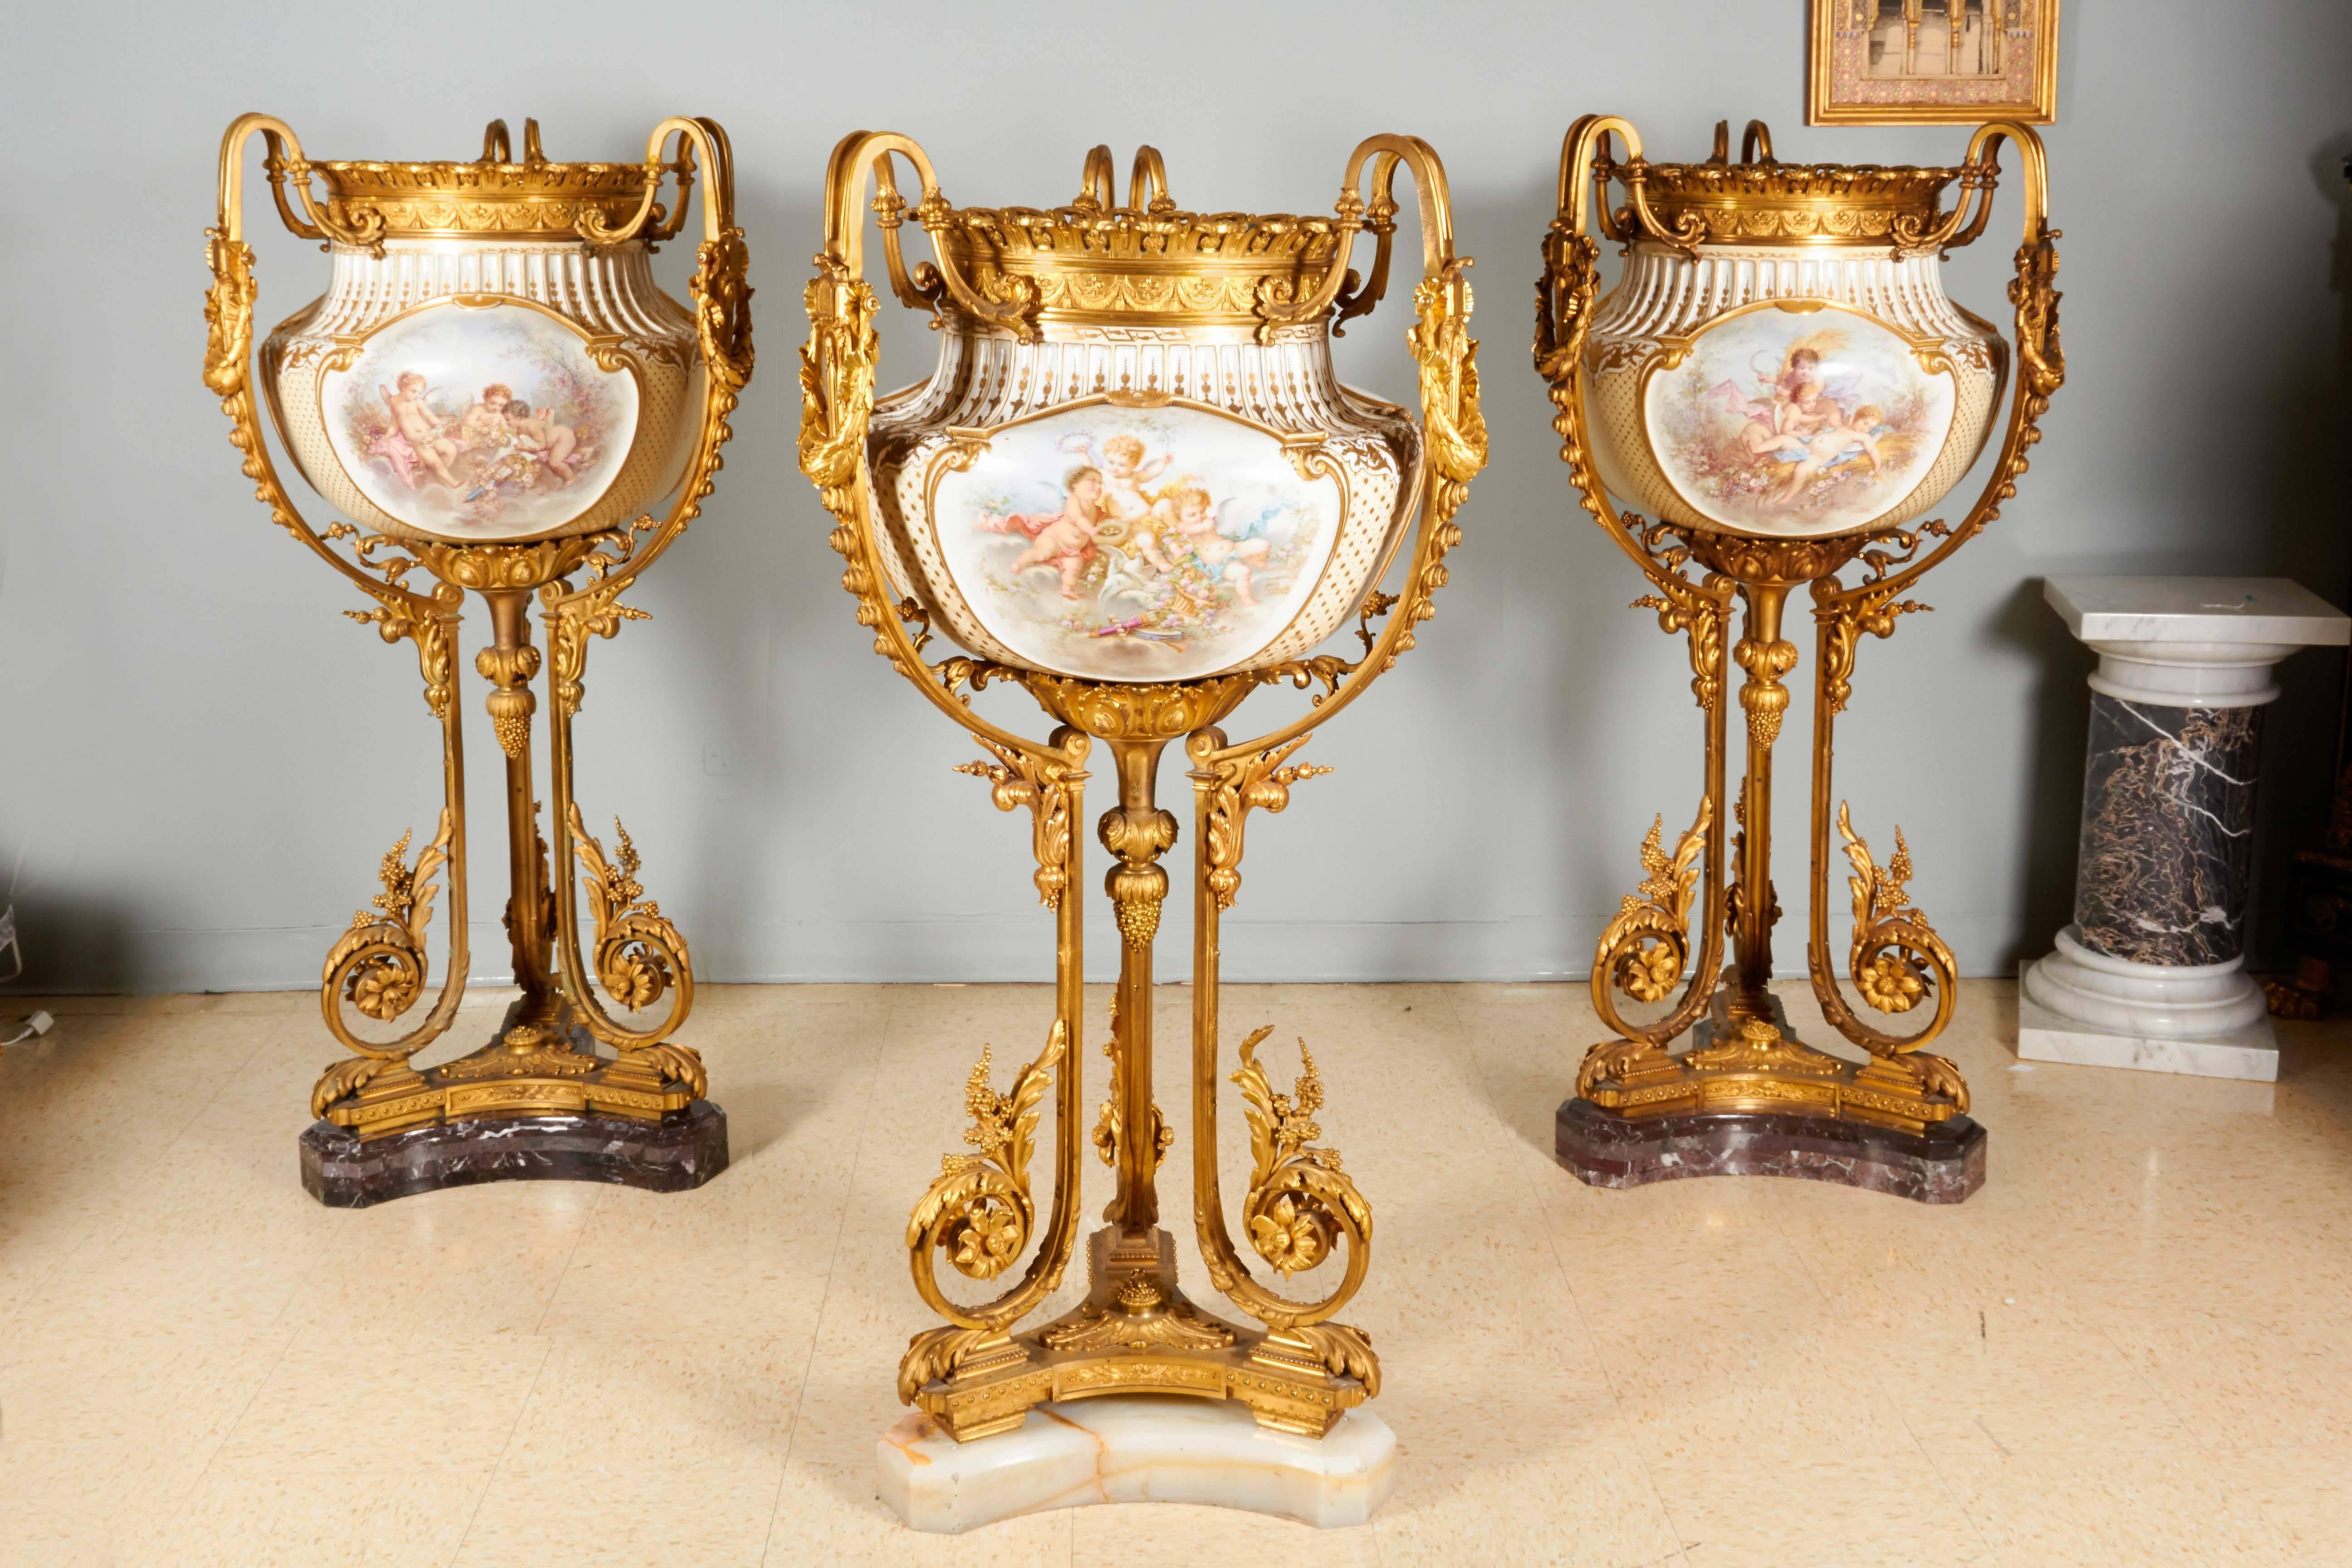 A highly important and palatial /monumental Sèvres-style porcelain jardiniere / planter vase, mounted in the finest ormolu. Most definitely commissioned for a royal family in Paris.

19th century, circa 1880.

Each body is molded with three large